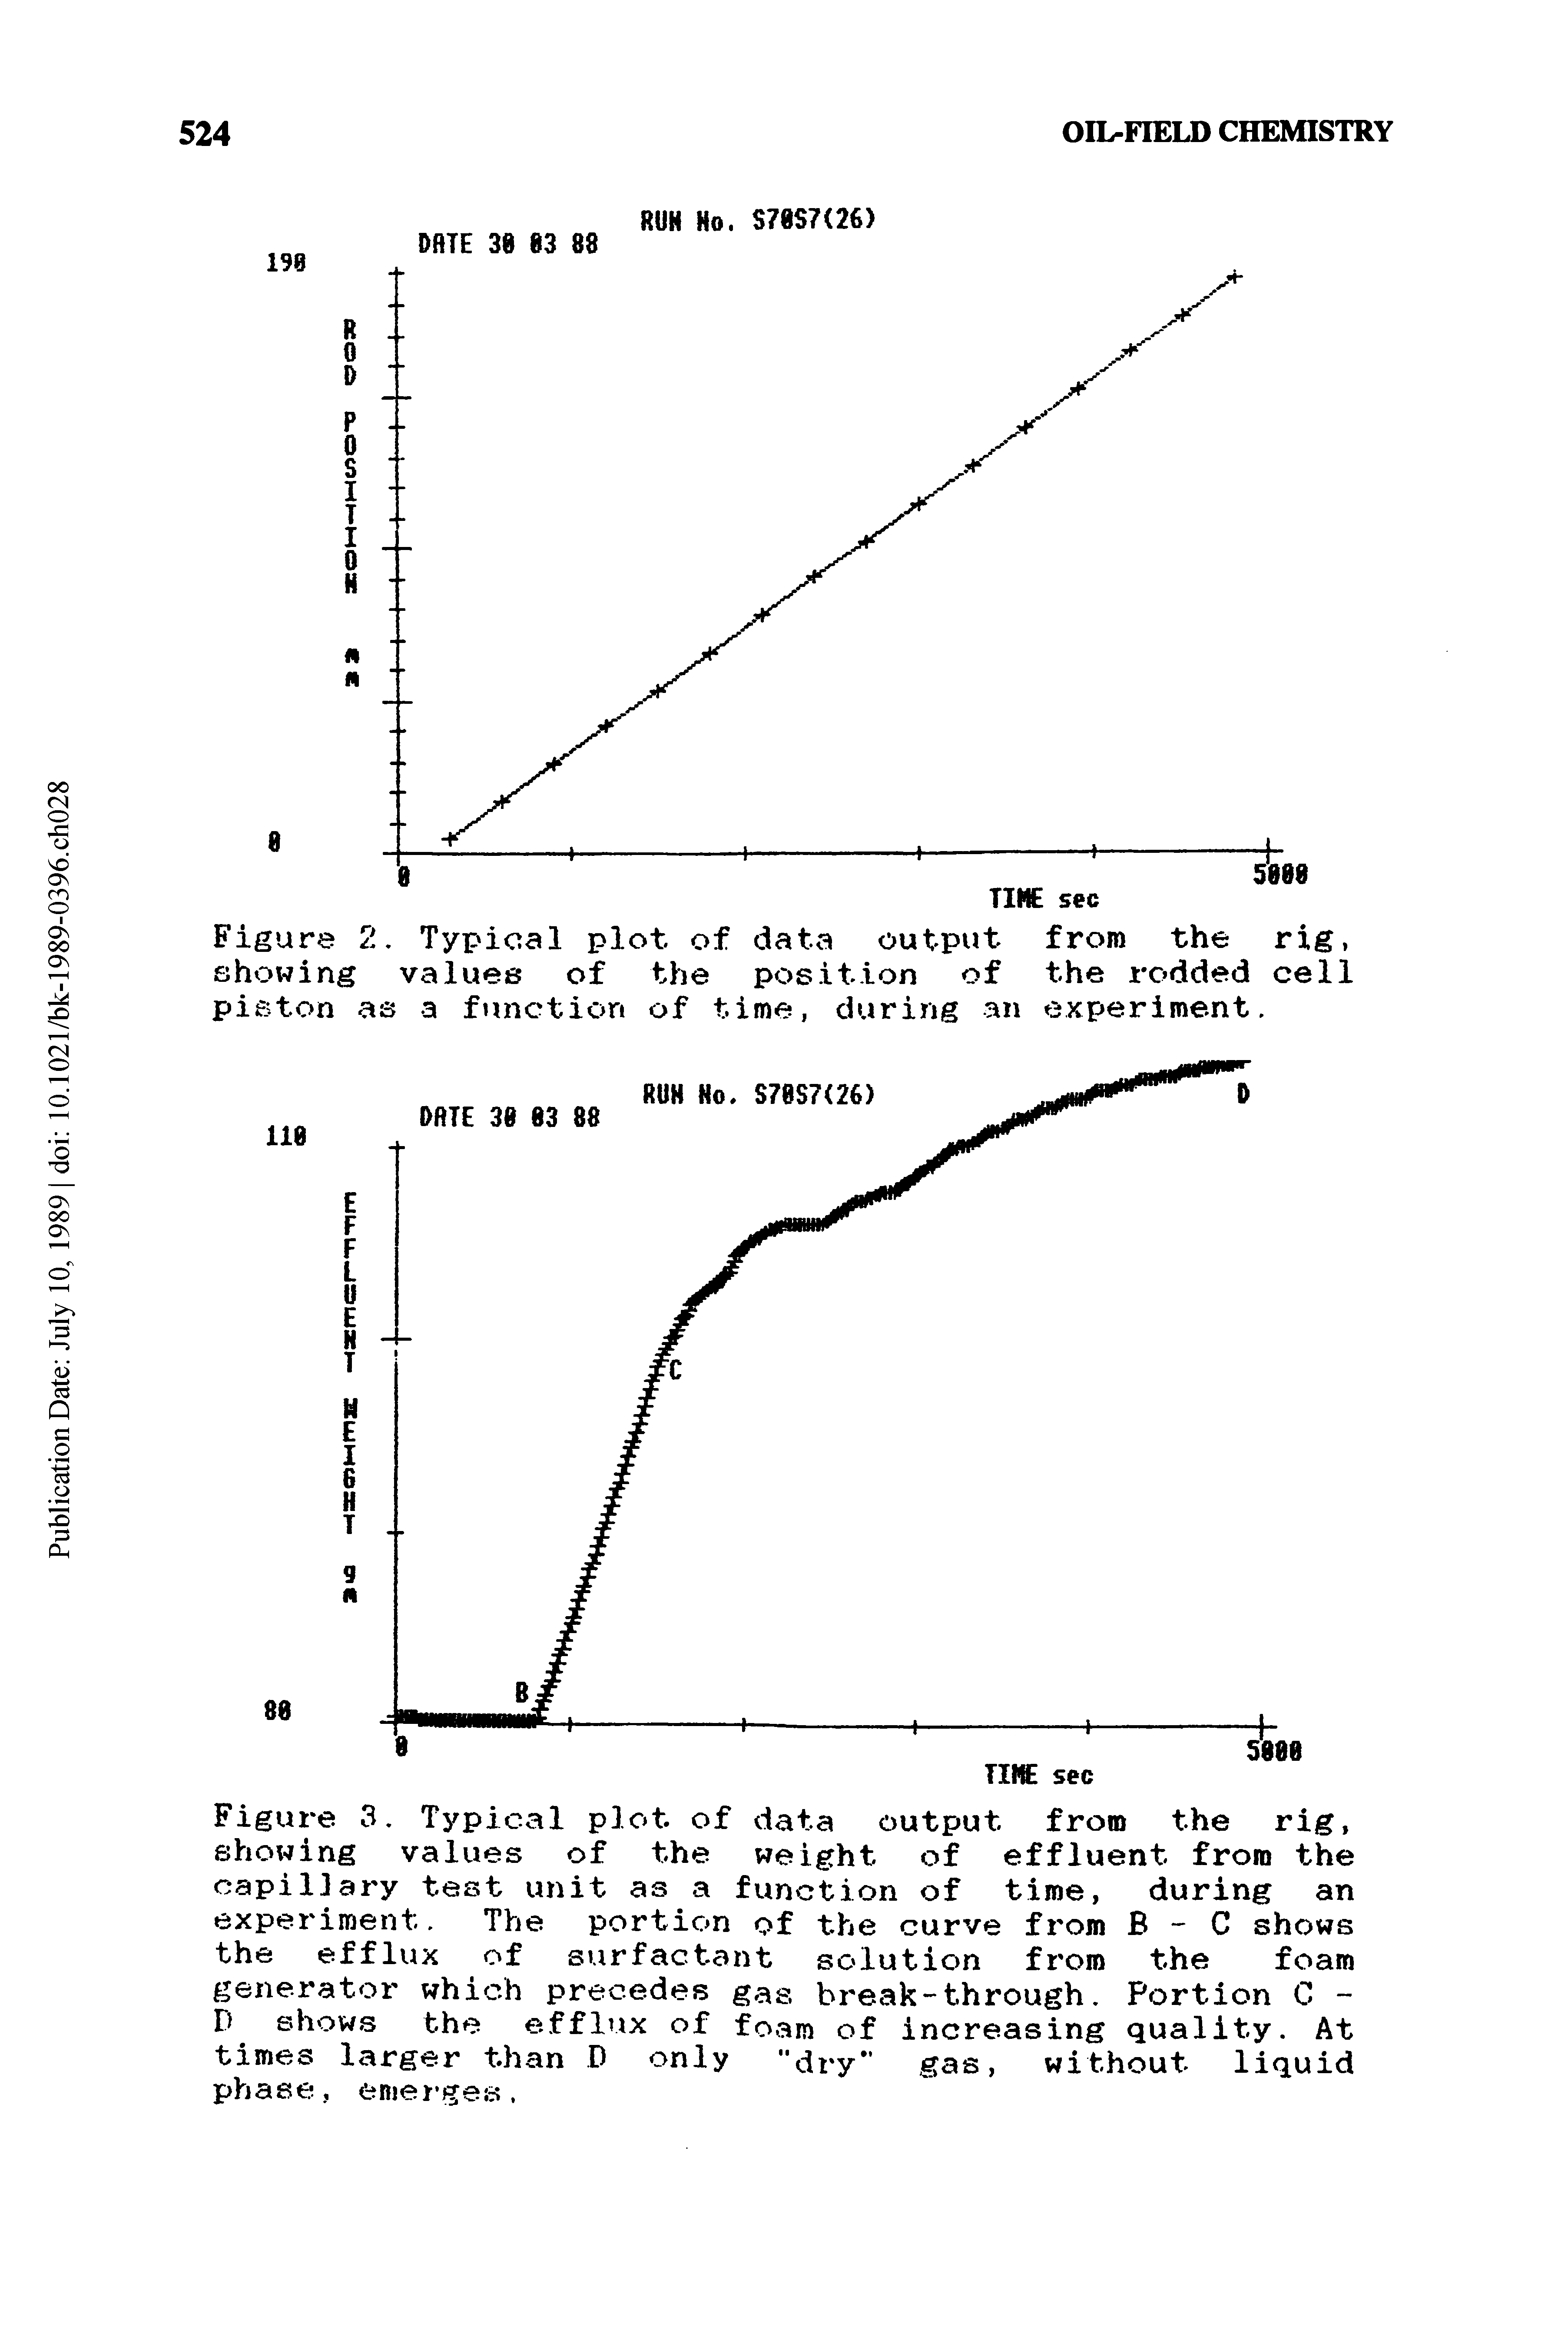 Figure 3. Typical plot of data output from the rig, showing values of the weight of effluent from the capillary test unit as a function of time, during an experiment. The portion of the curve from B - C shows the efflux of surfactant solution from the foam generator which precedes gas break-through. Portion C -D< shows the efflux of foam of increasing quality. At times larger than D only "dry gas, without liquid phase, emerges.